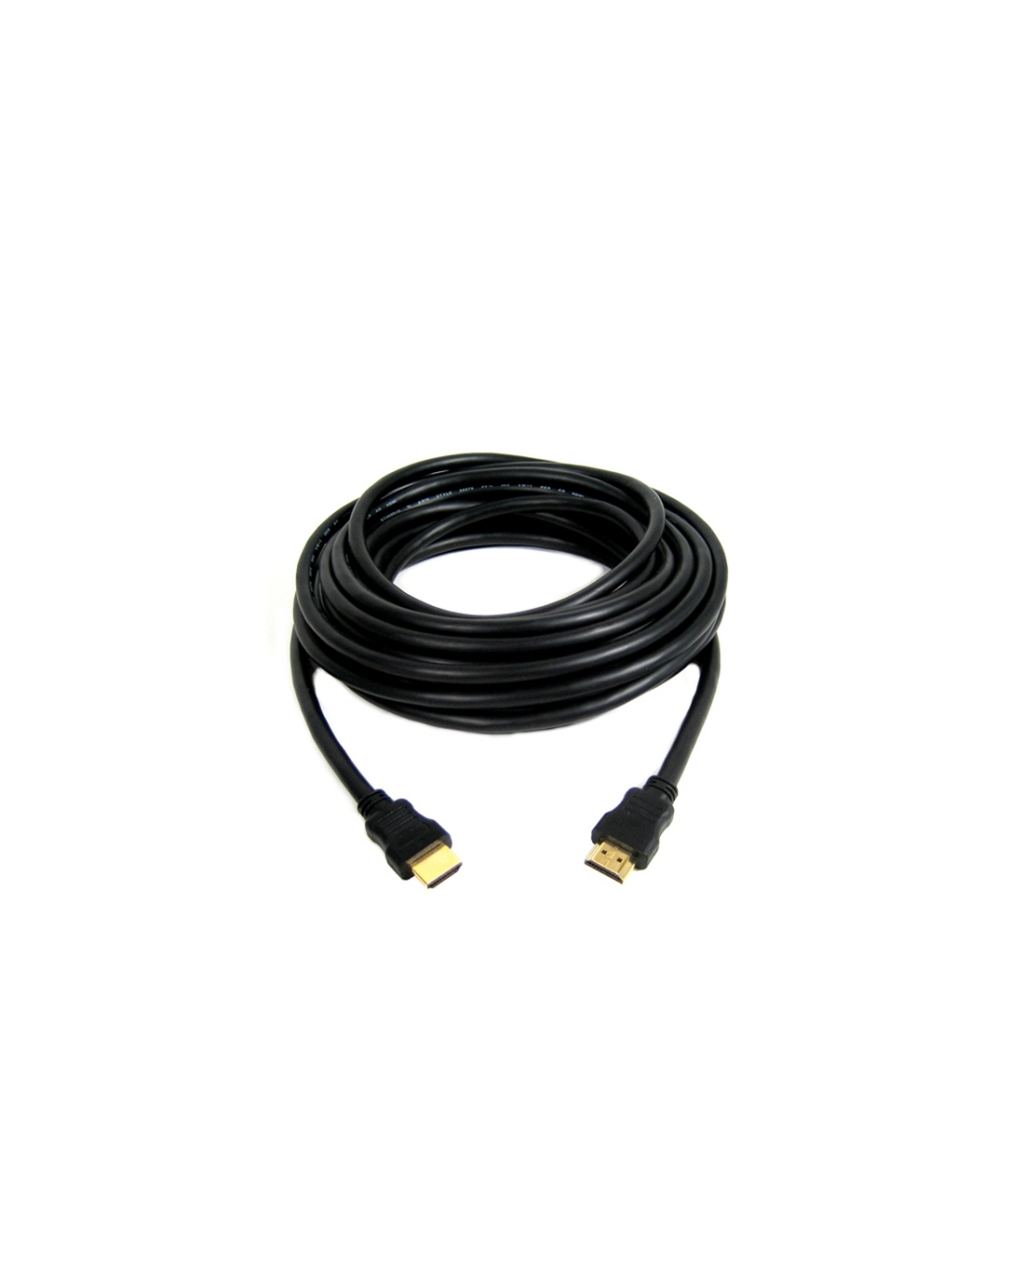 HDMI cable 10M and 15M